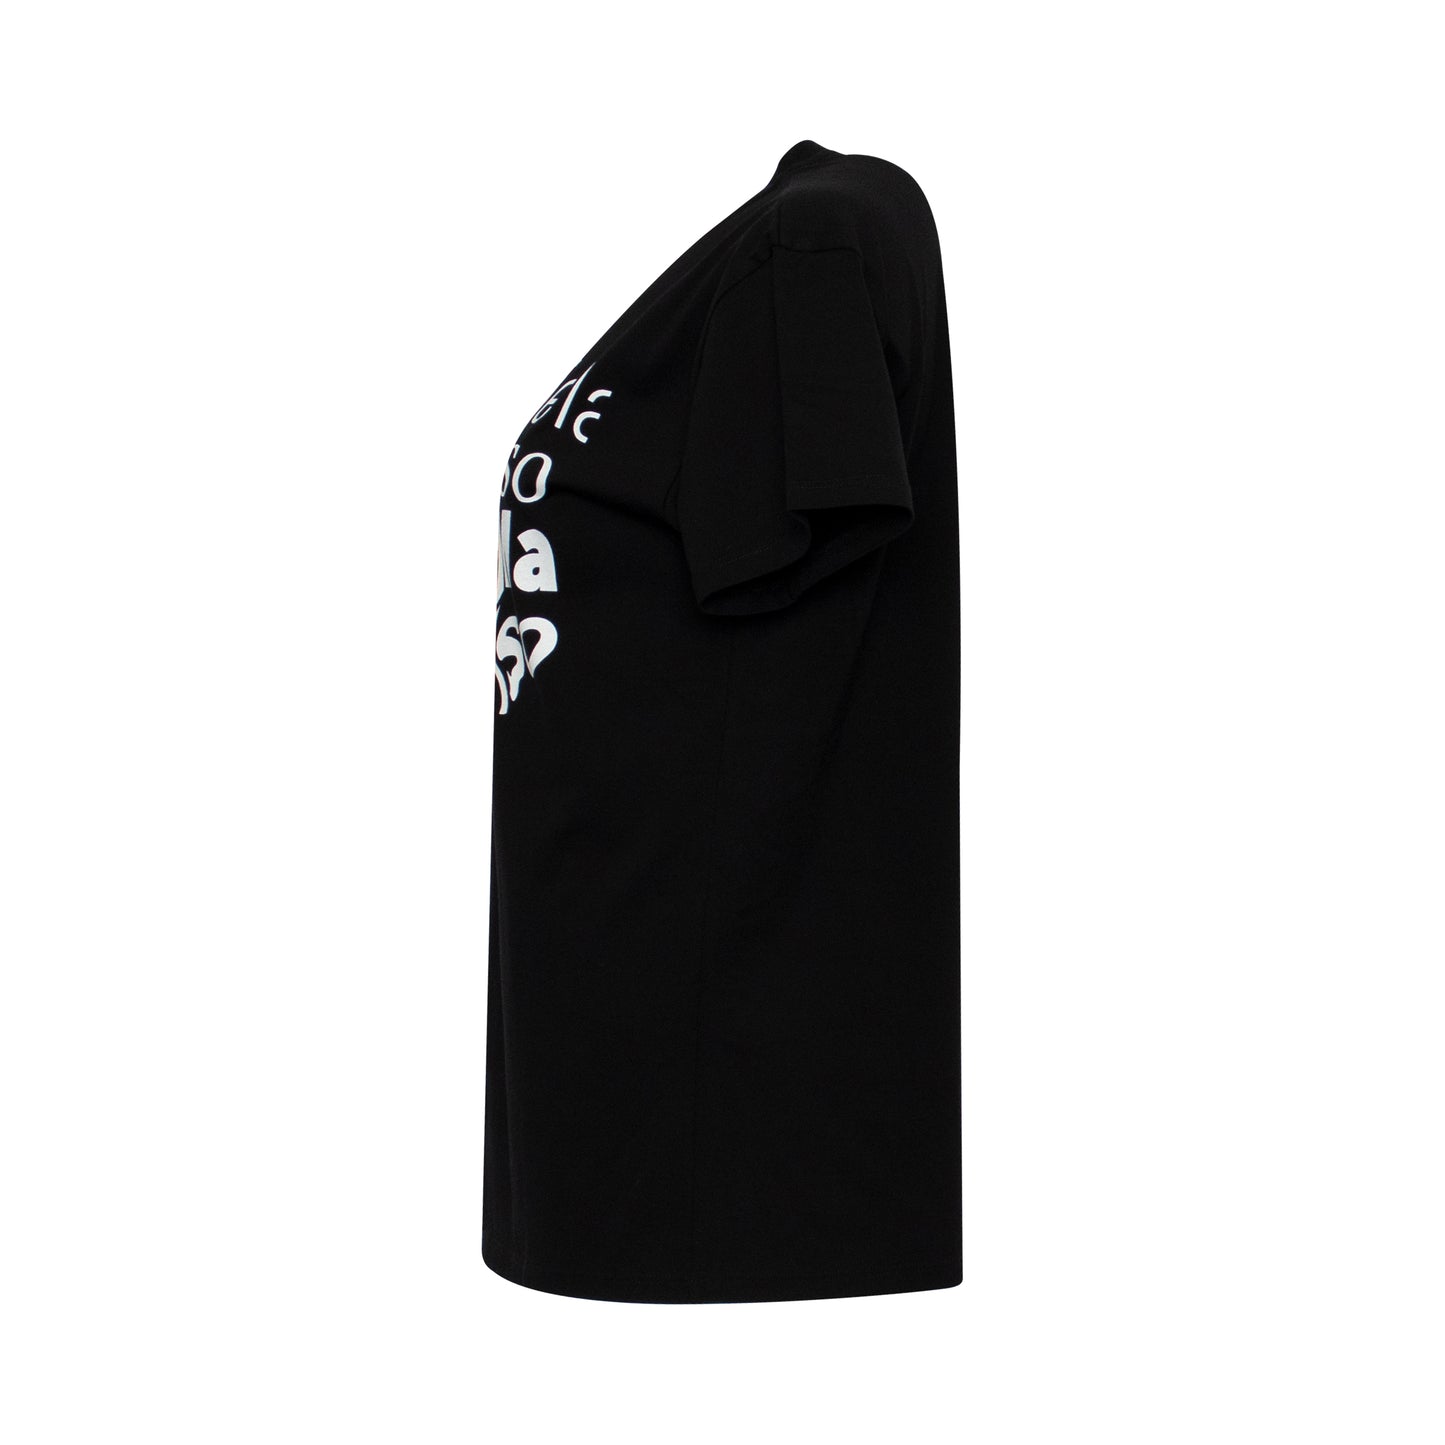 Distorted Logo T-Shirt in Black